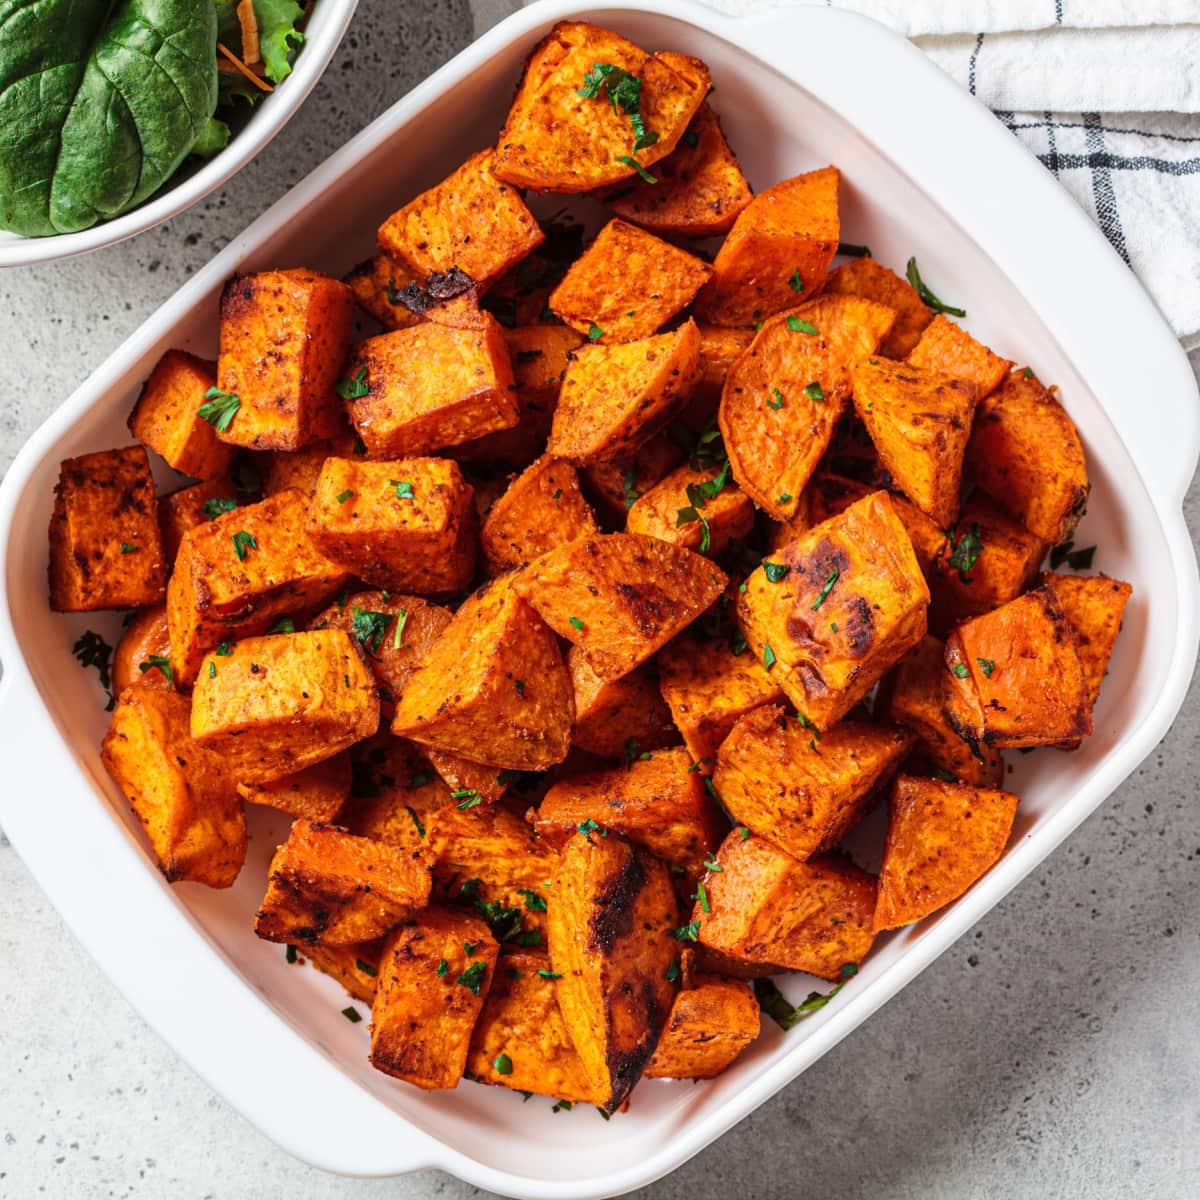 Baked Sweet Potatoes in a White Baking Dish